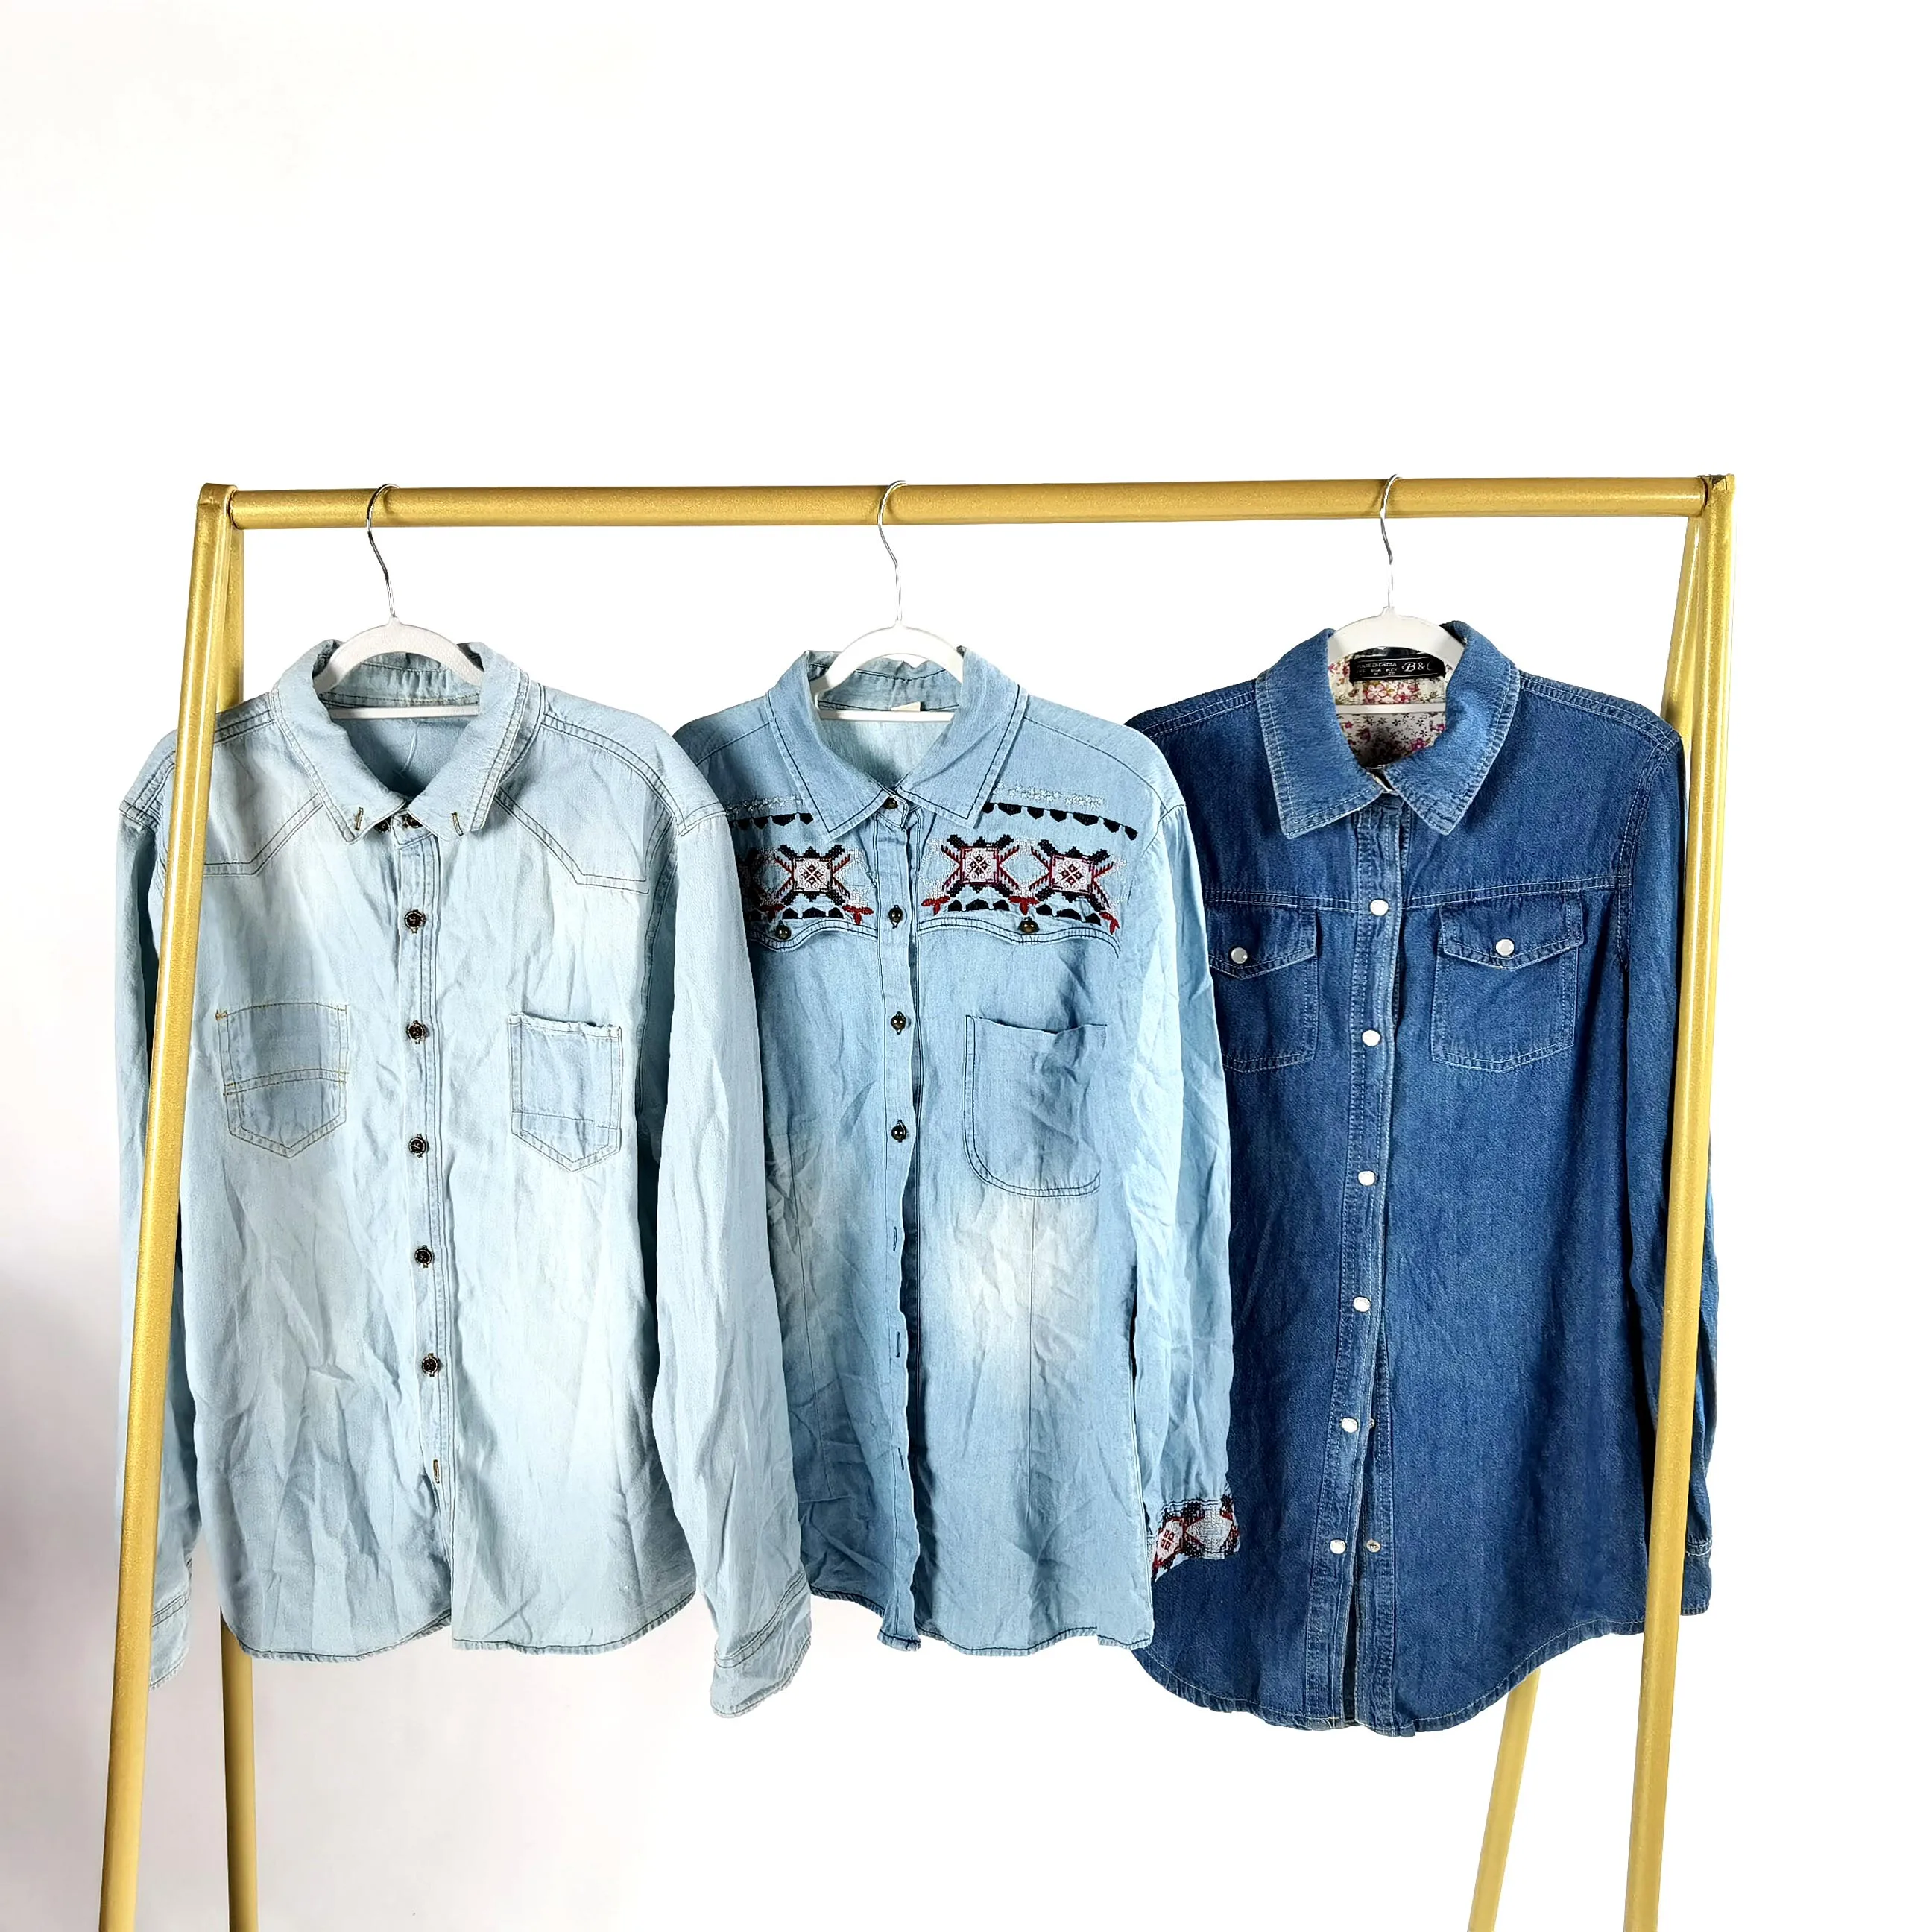 
High quality A Grade Jean Shirt Used Clothes 45 kgs per Bale 